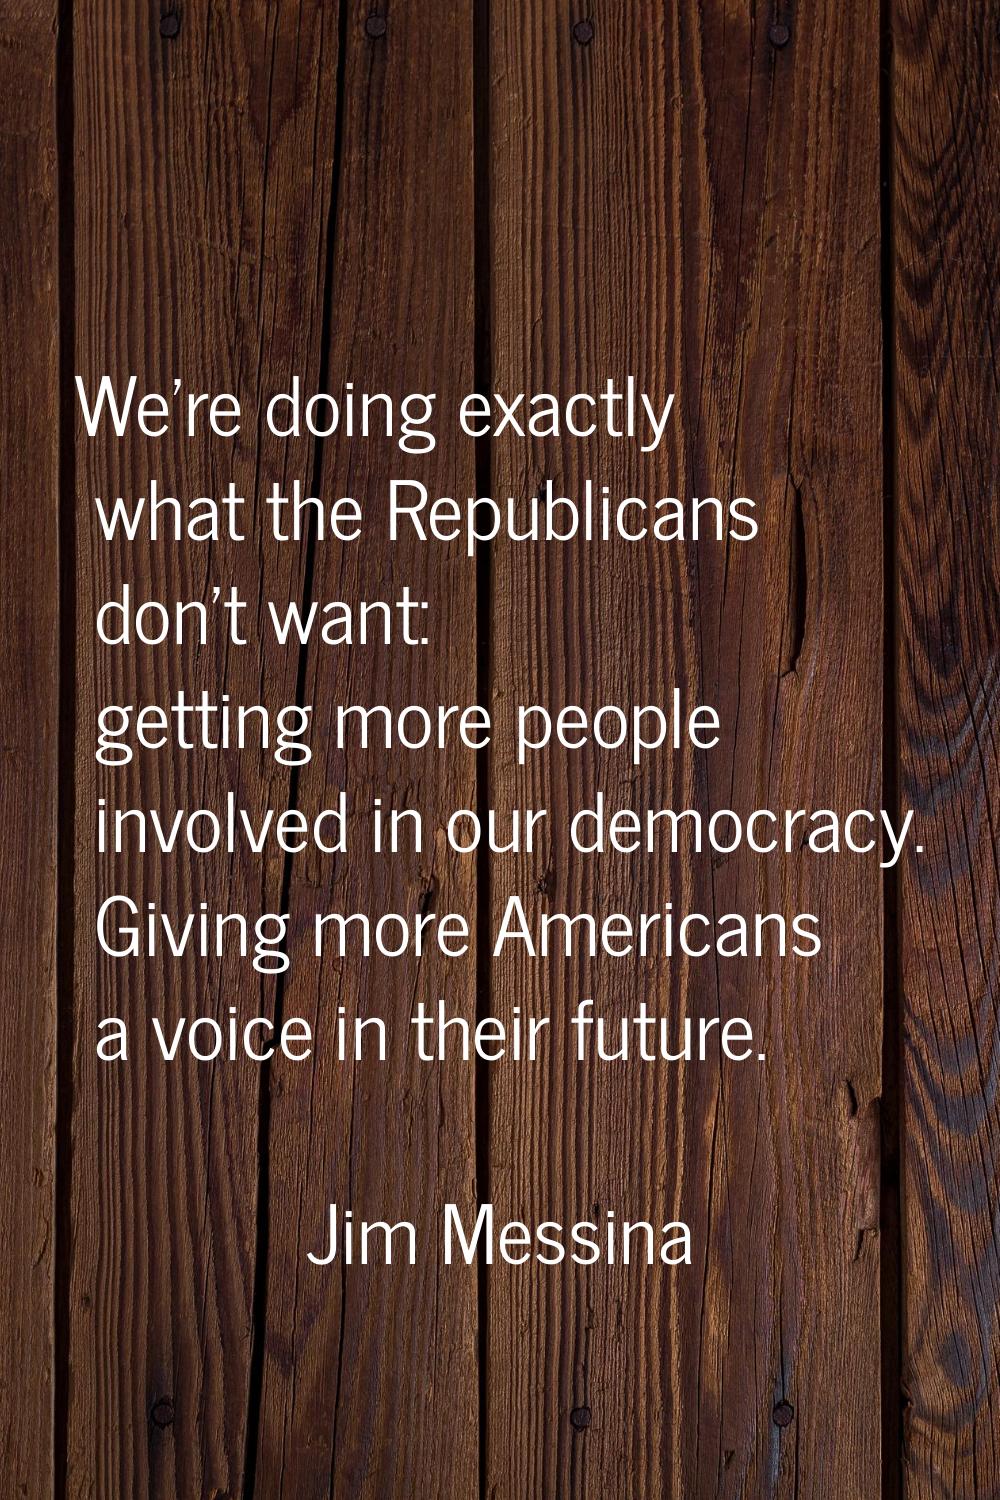 We're doing exactly what the Republicans don't want: getting more people involved in our democracy.